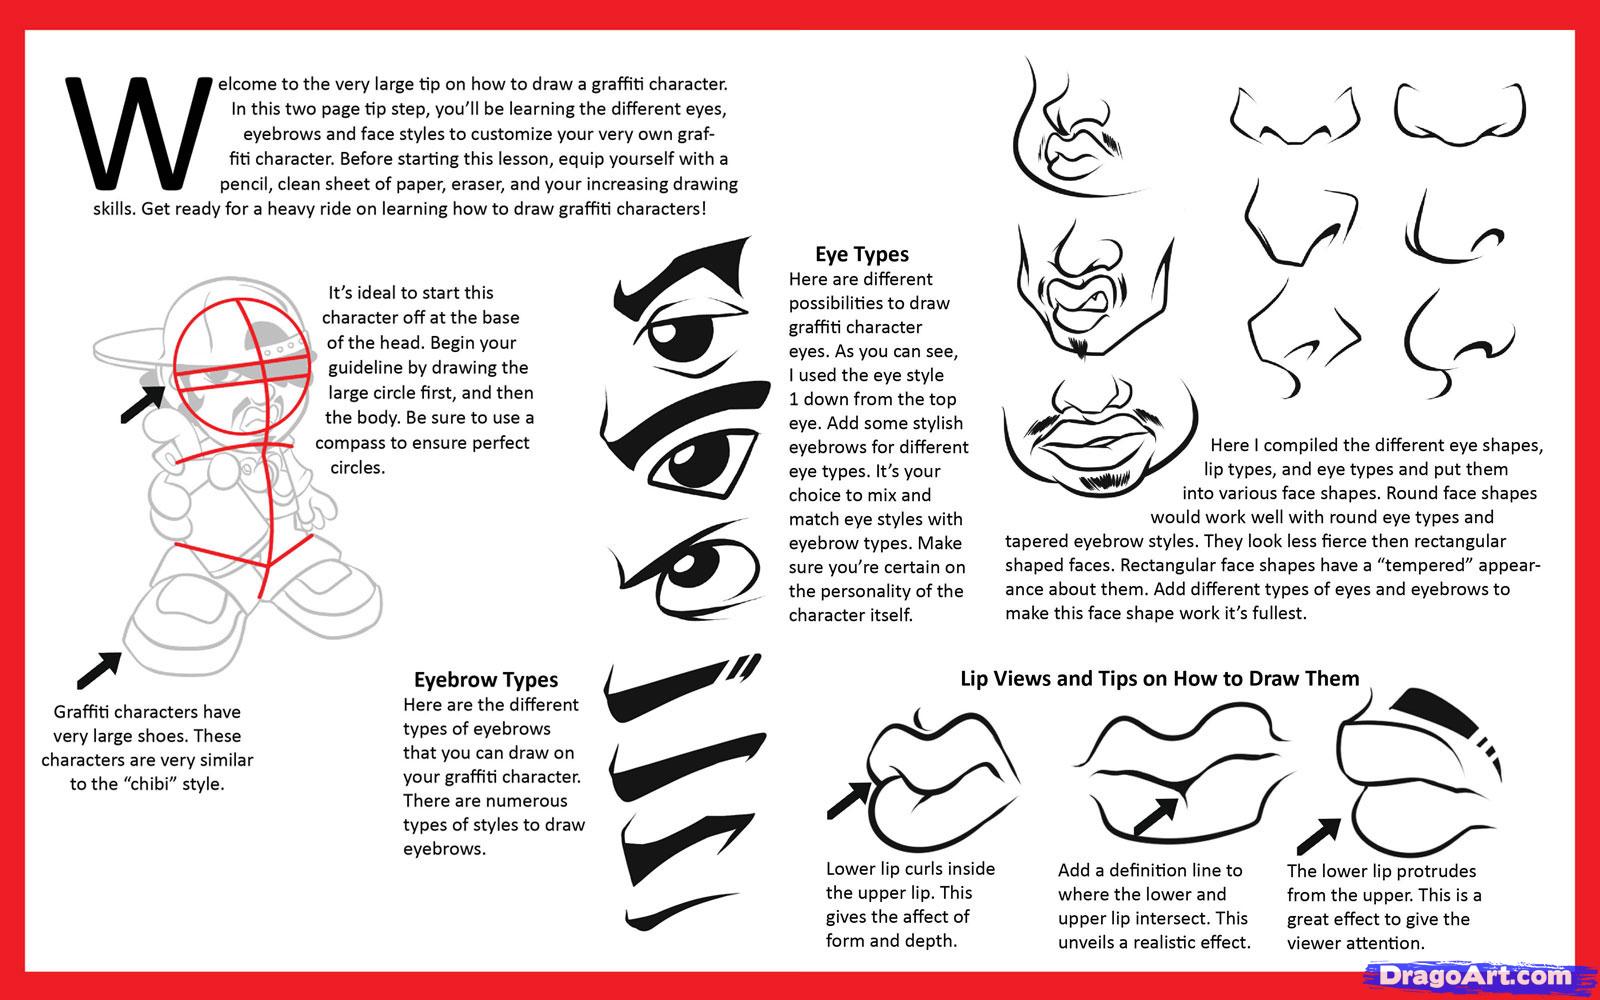 How to Draw a Graffiti Character, Step by Step, Graffiti, Pop ...